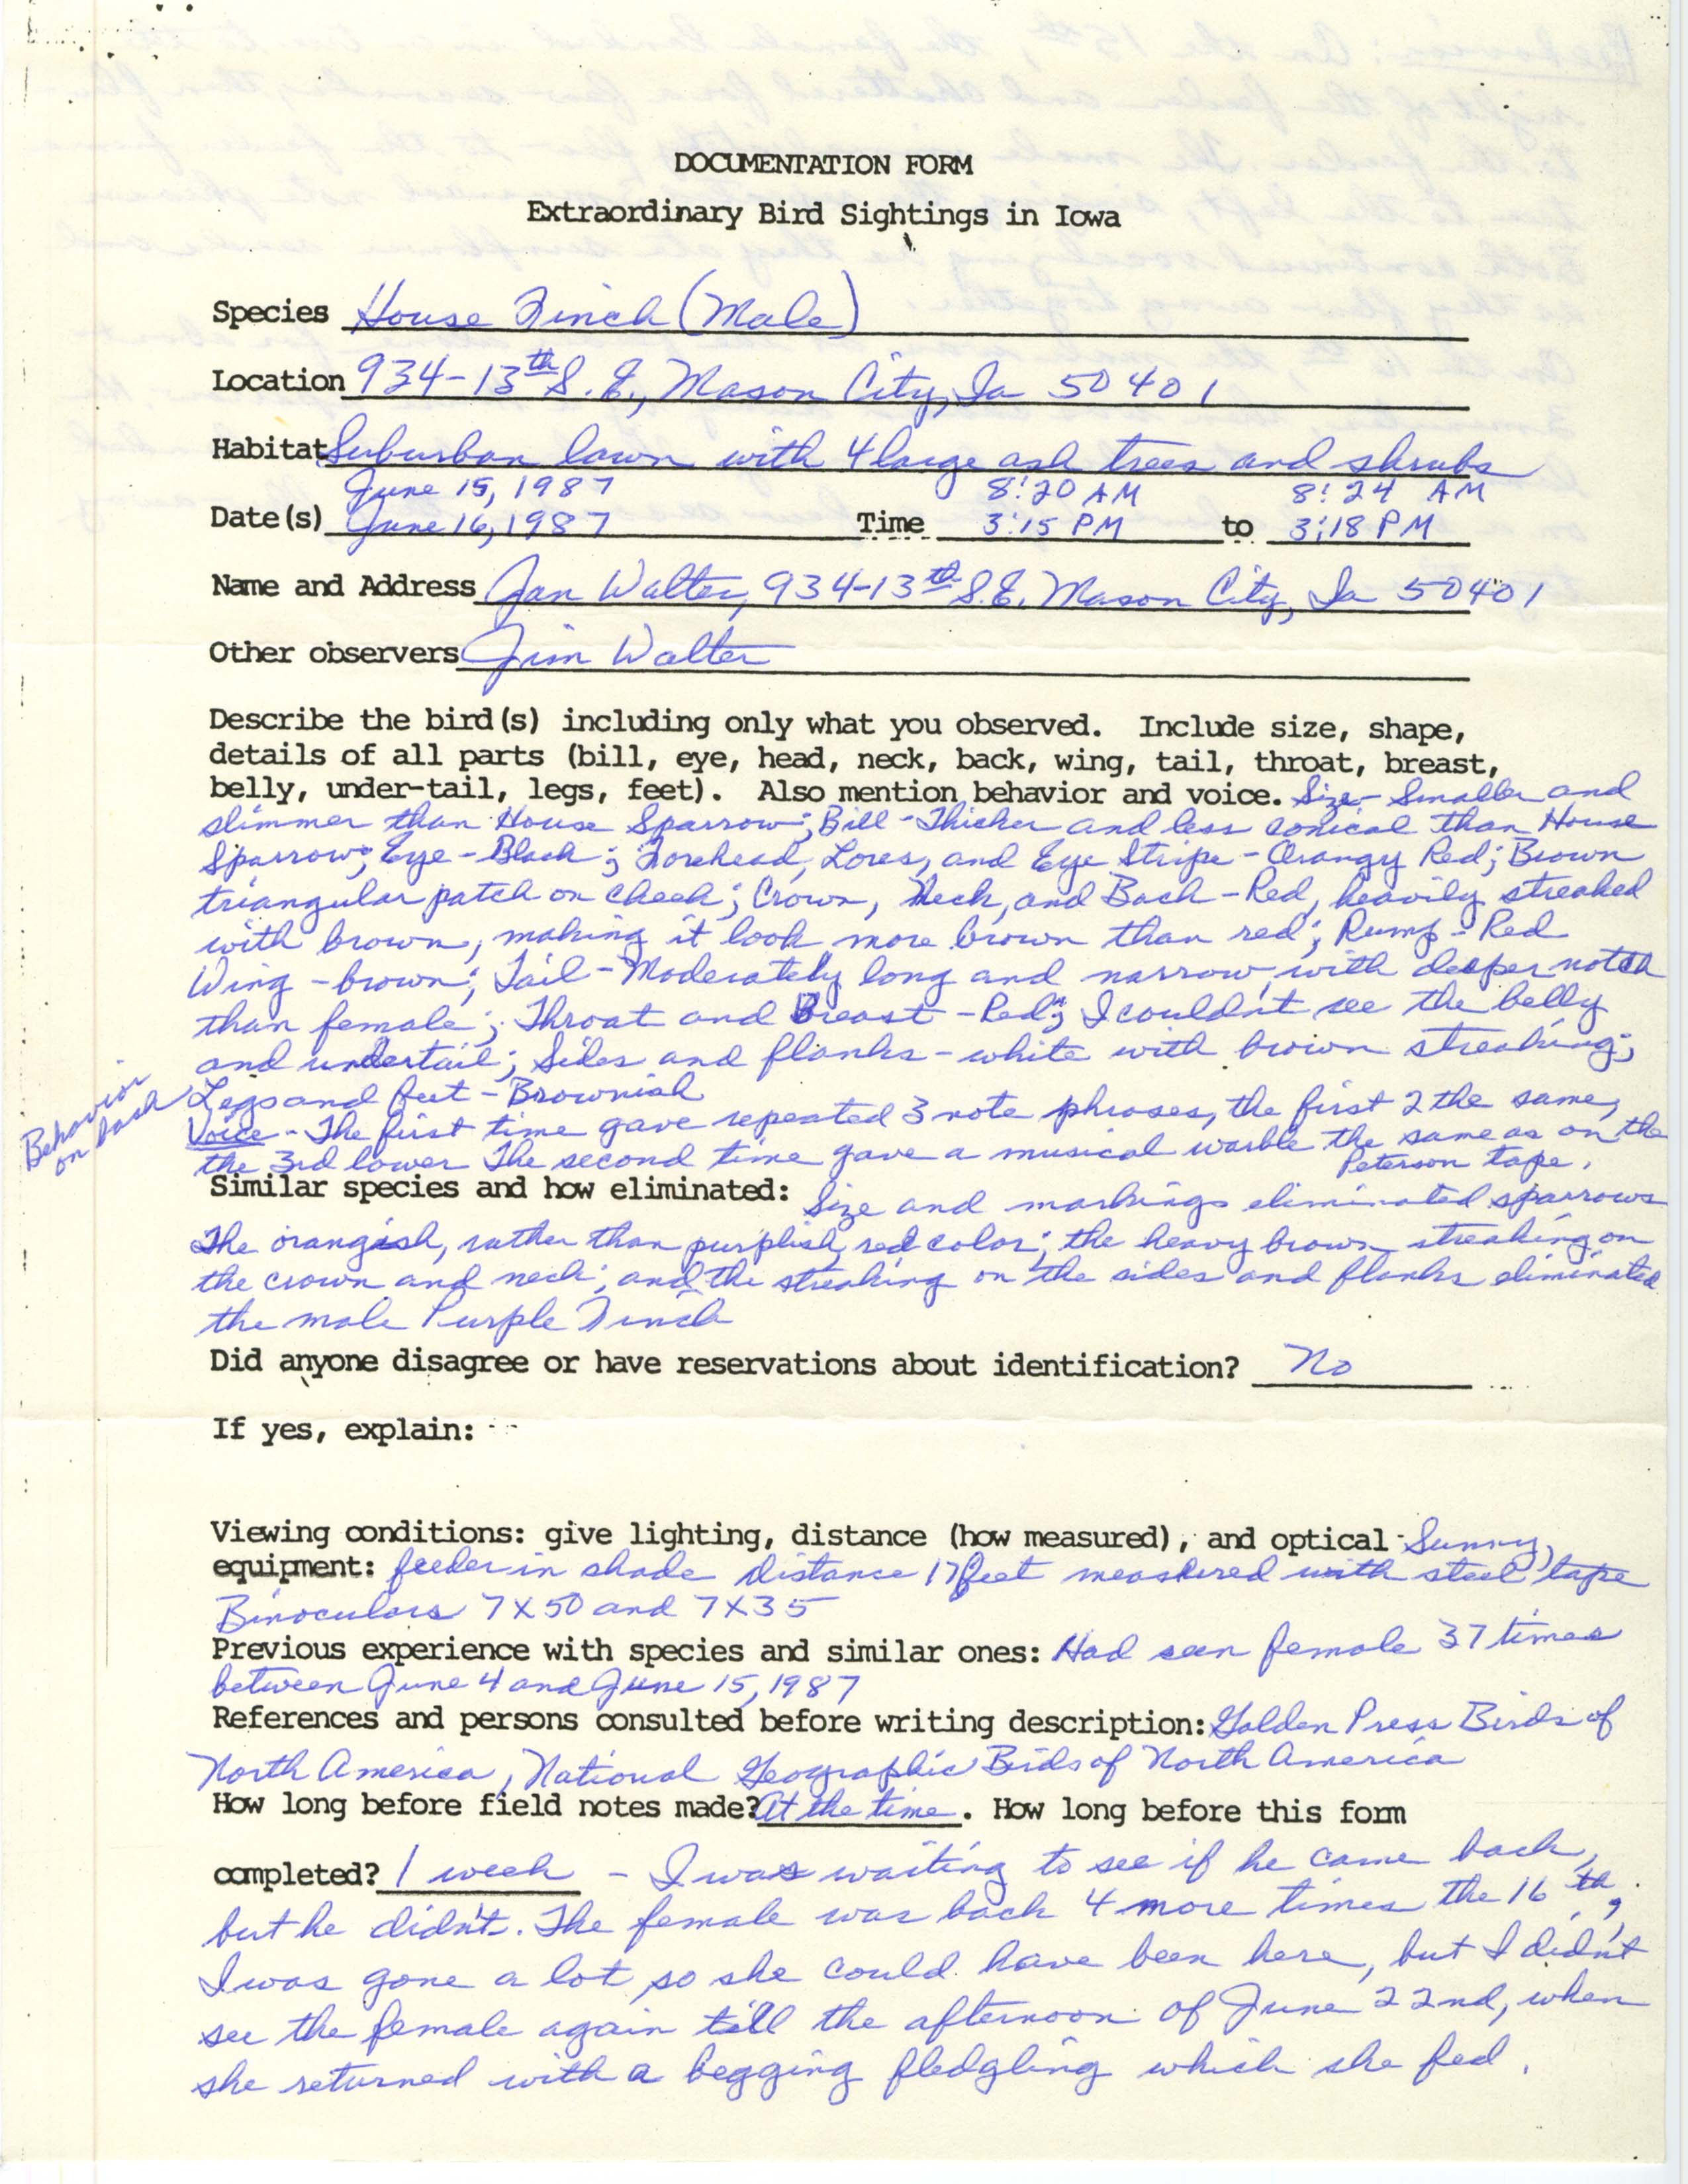 Rare bird documentation form for House Finch at Mason City in 1987